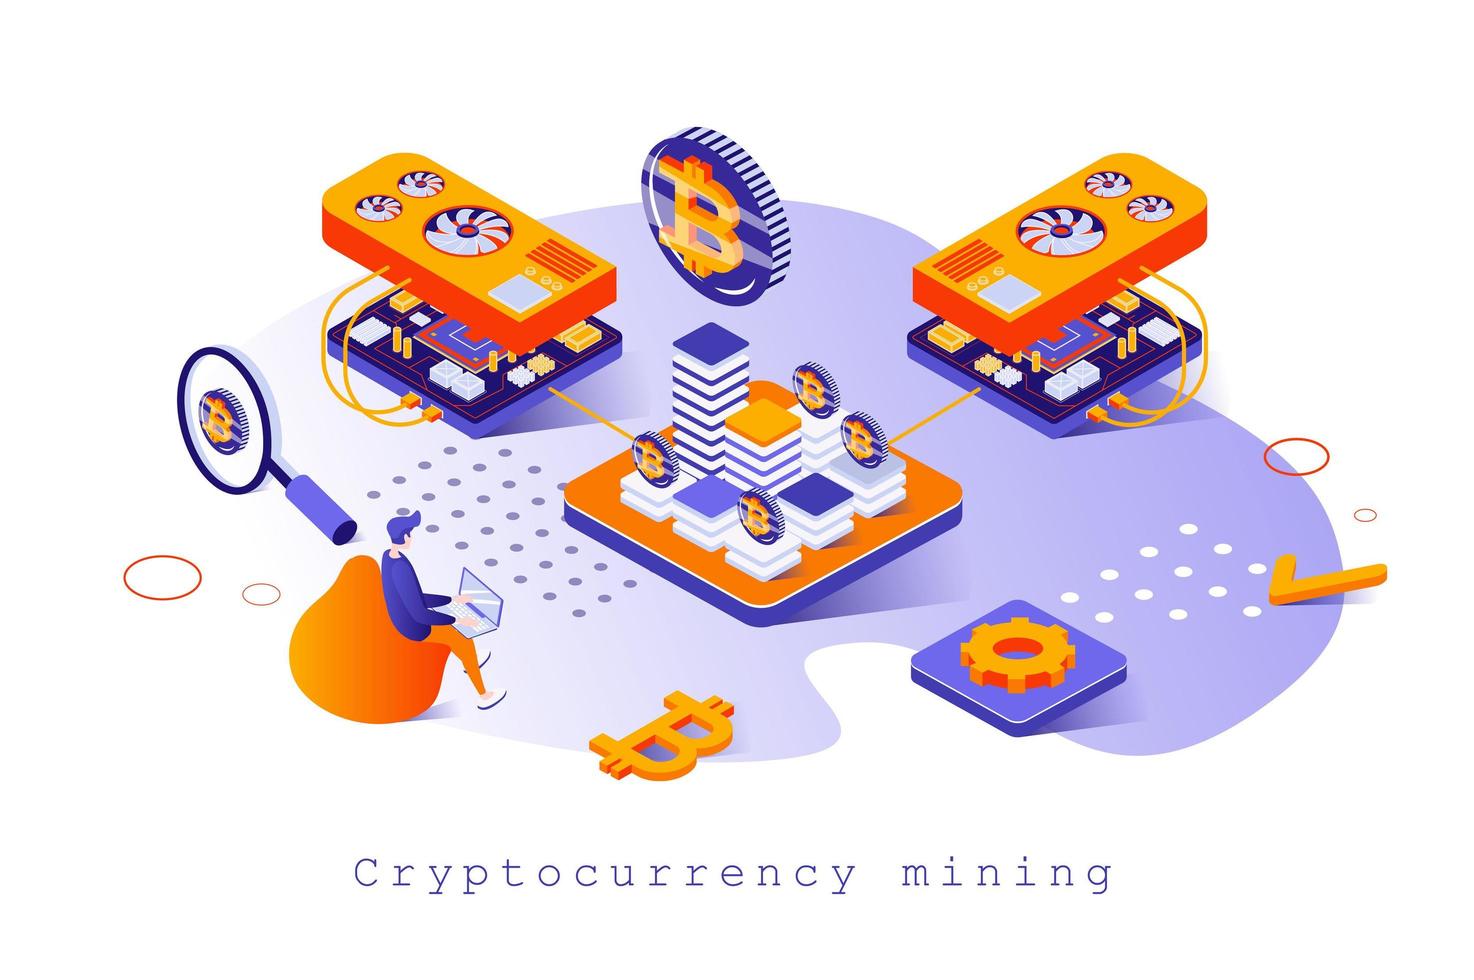 Cryptocurrency mining concept in 3d isometric design. Mining bitcoins and other crypto money on farm, trading, blockchain technology, web template with people scene. Vector illustration for webpage